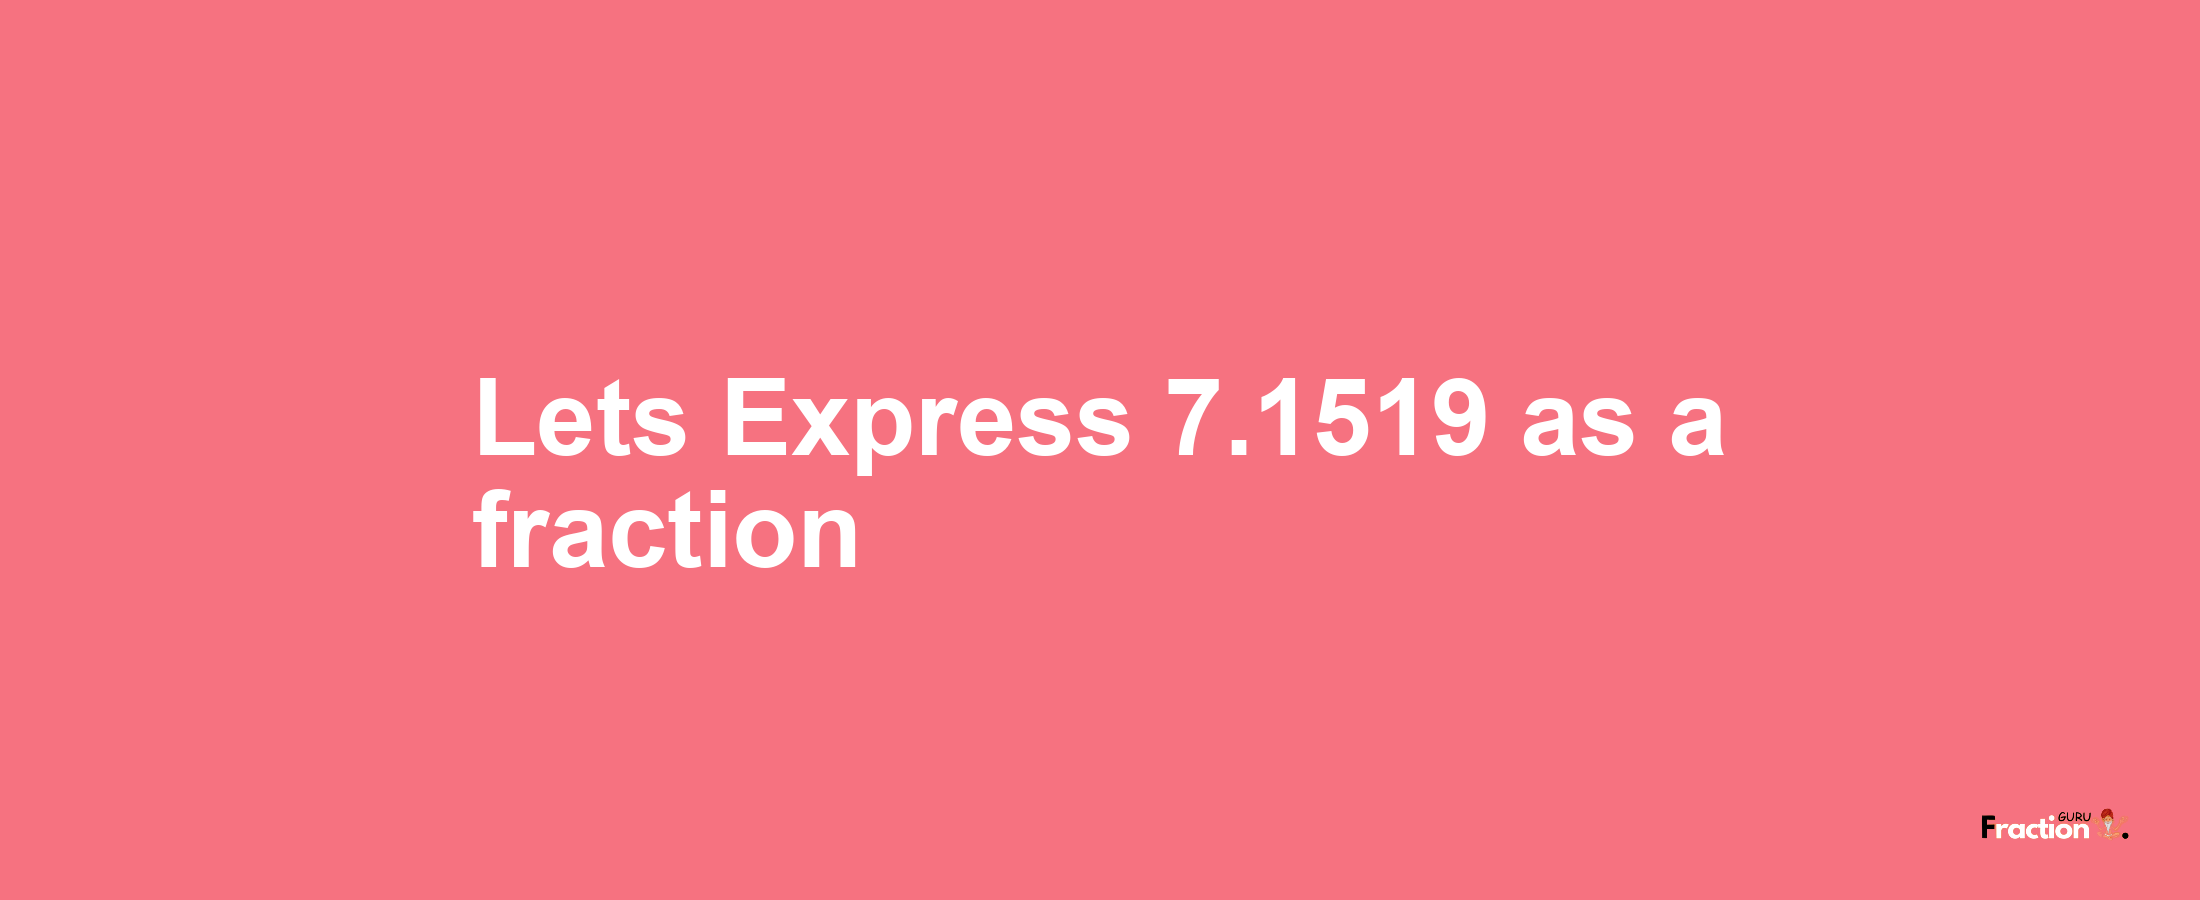 Lets Express 7.1519 as afraction